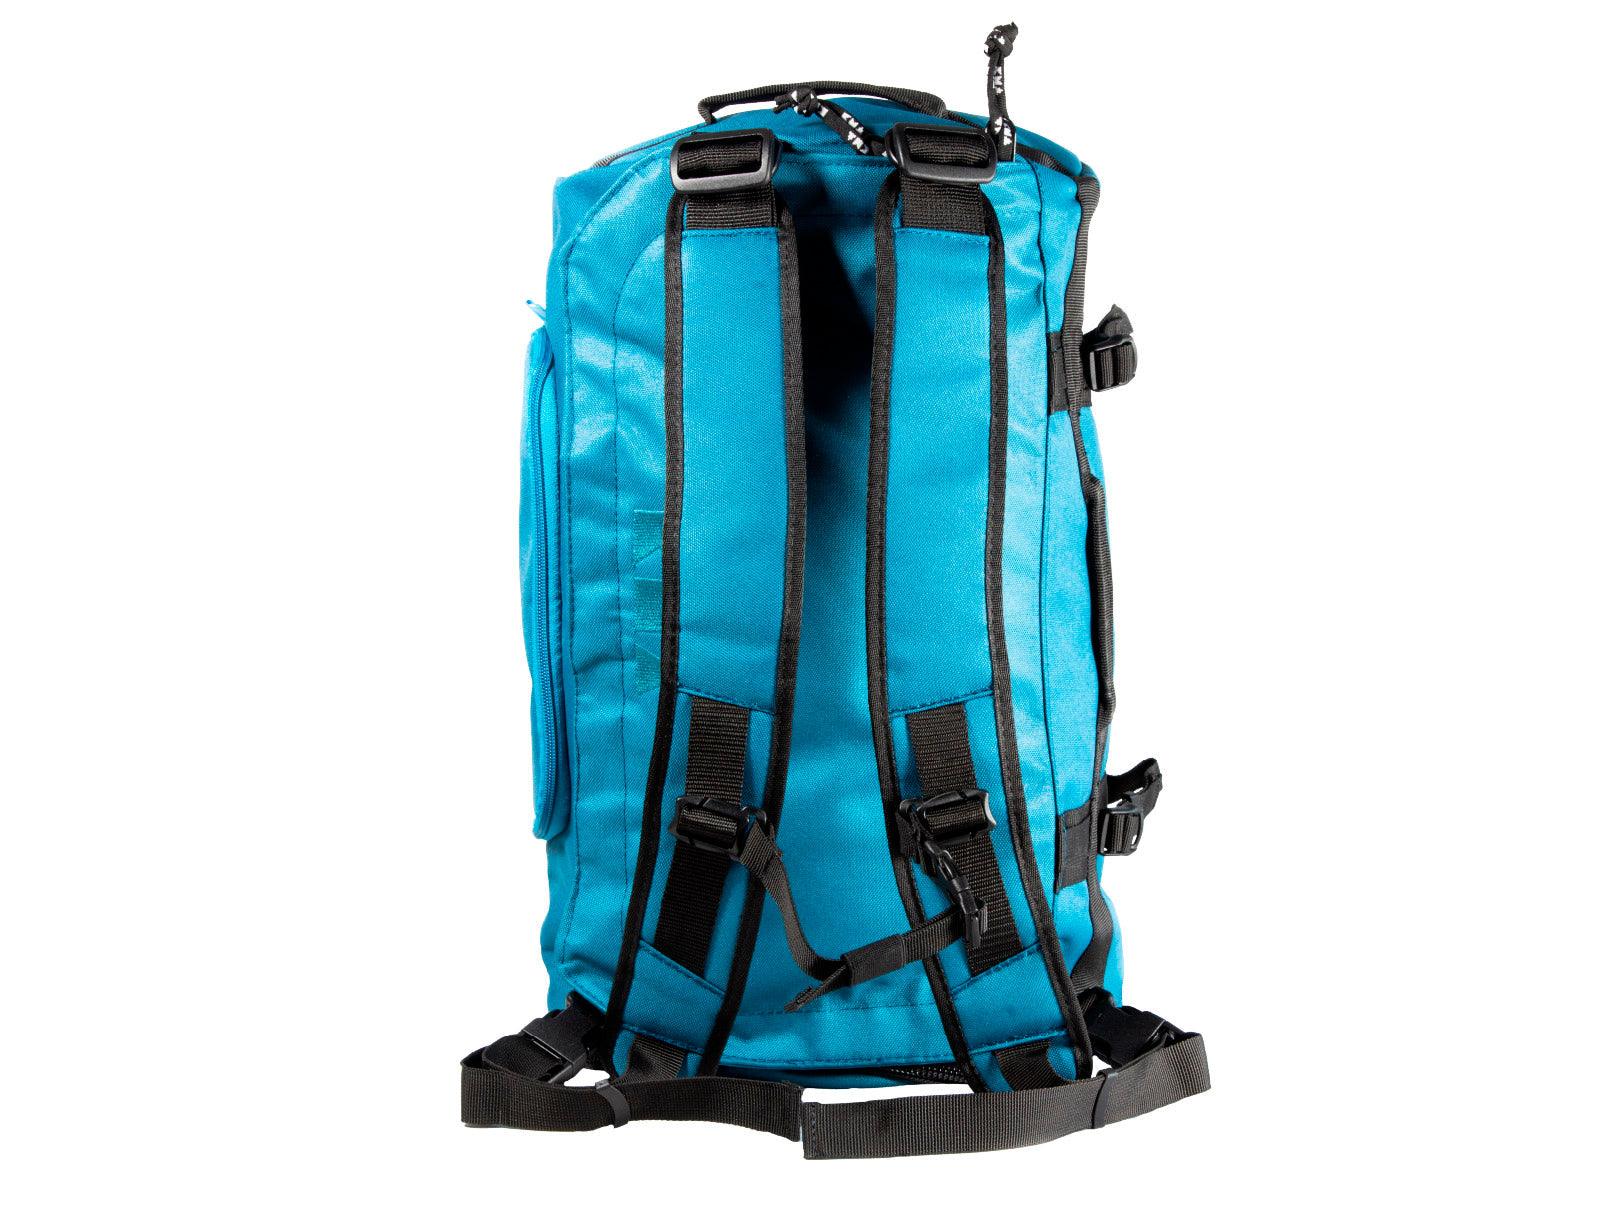 KMA Dry-Wet Travel Duffle Bag Backpack 15L Hiking Day Pack - Casa